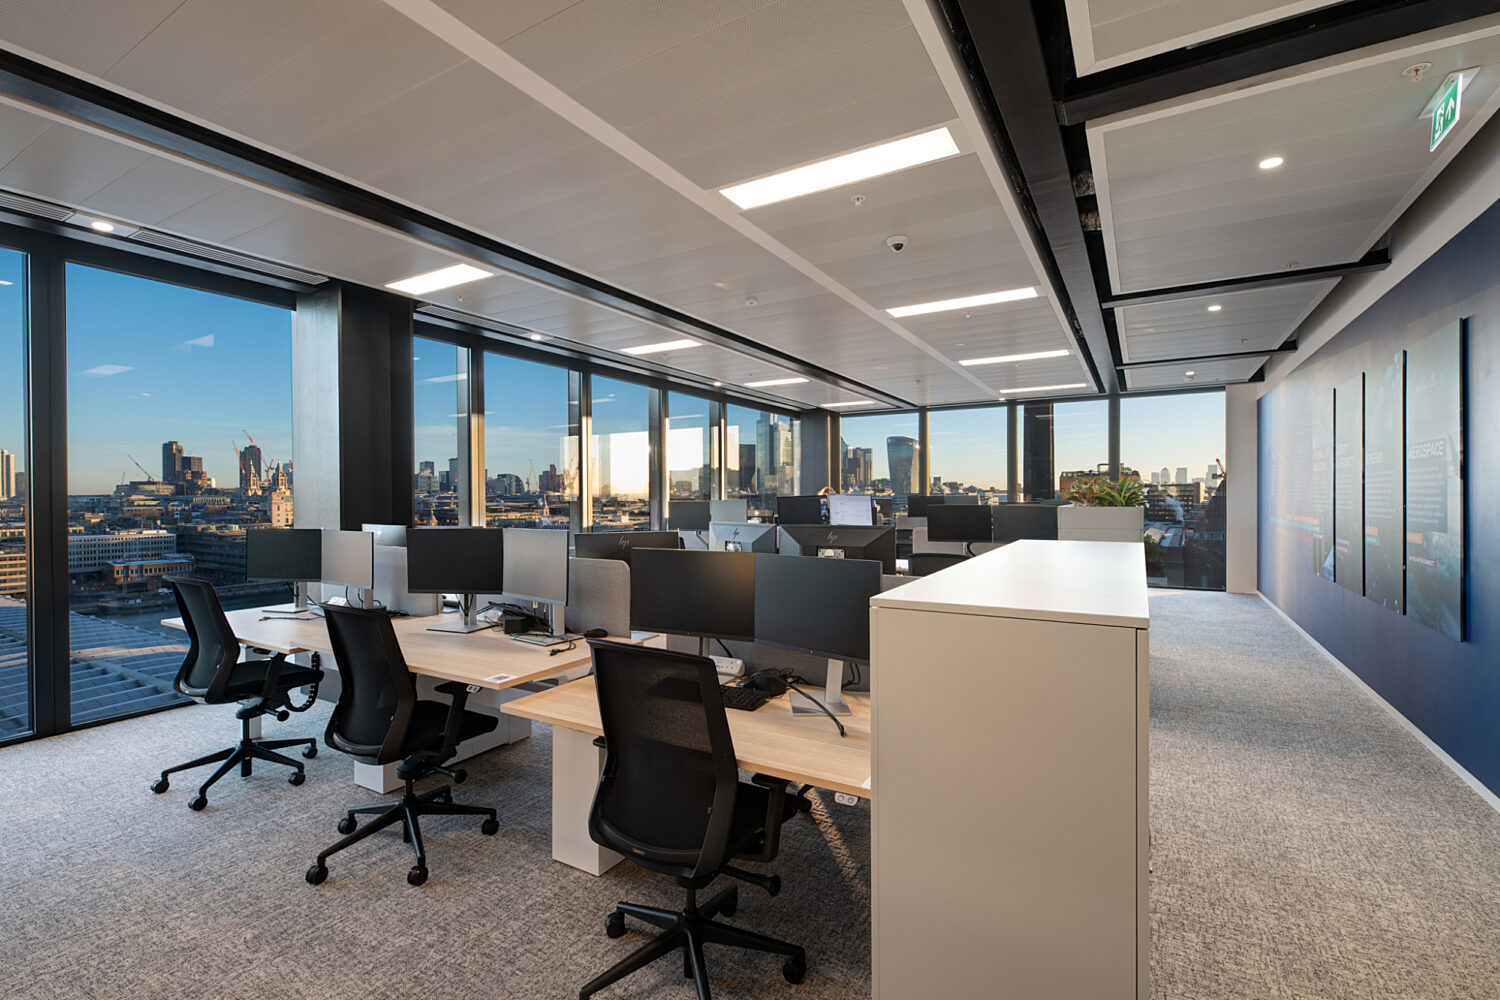 Desks with a view over the city of London